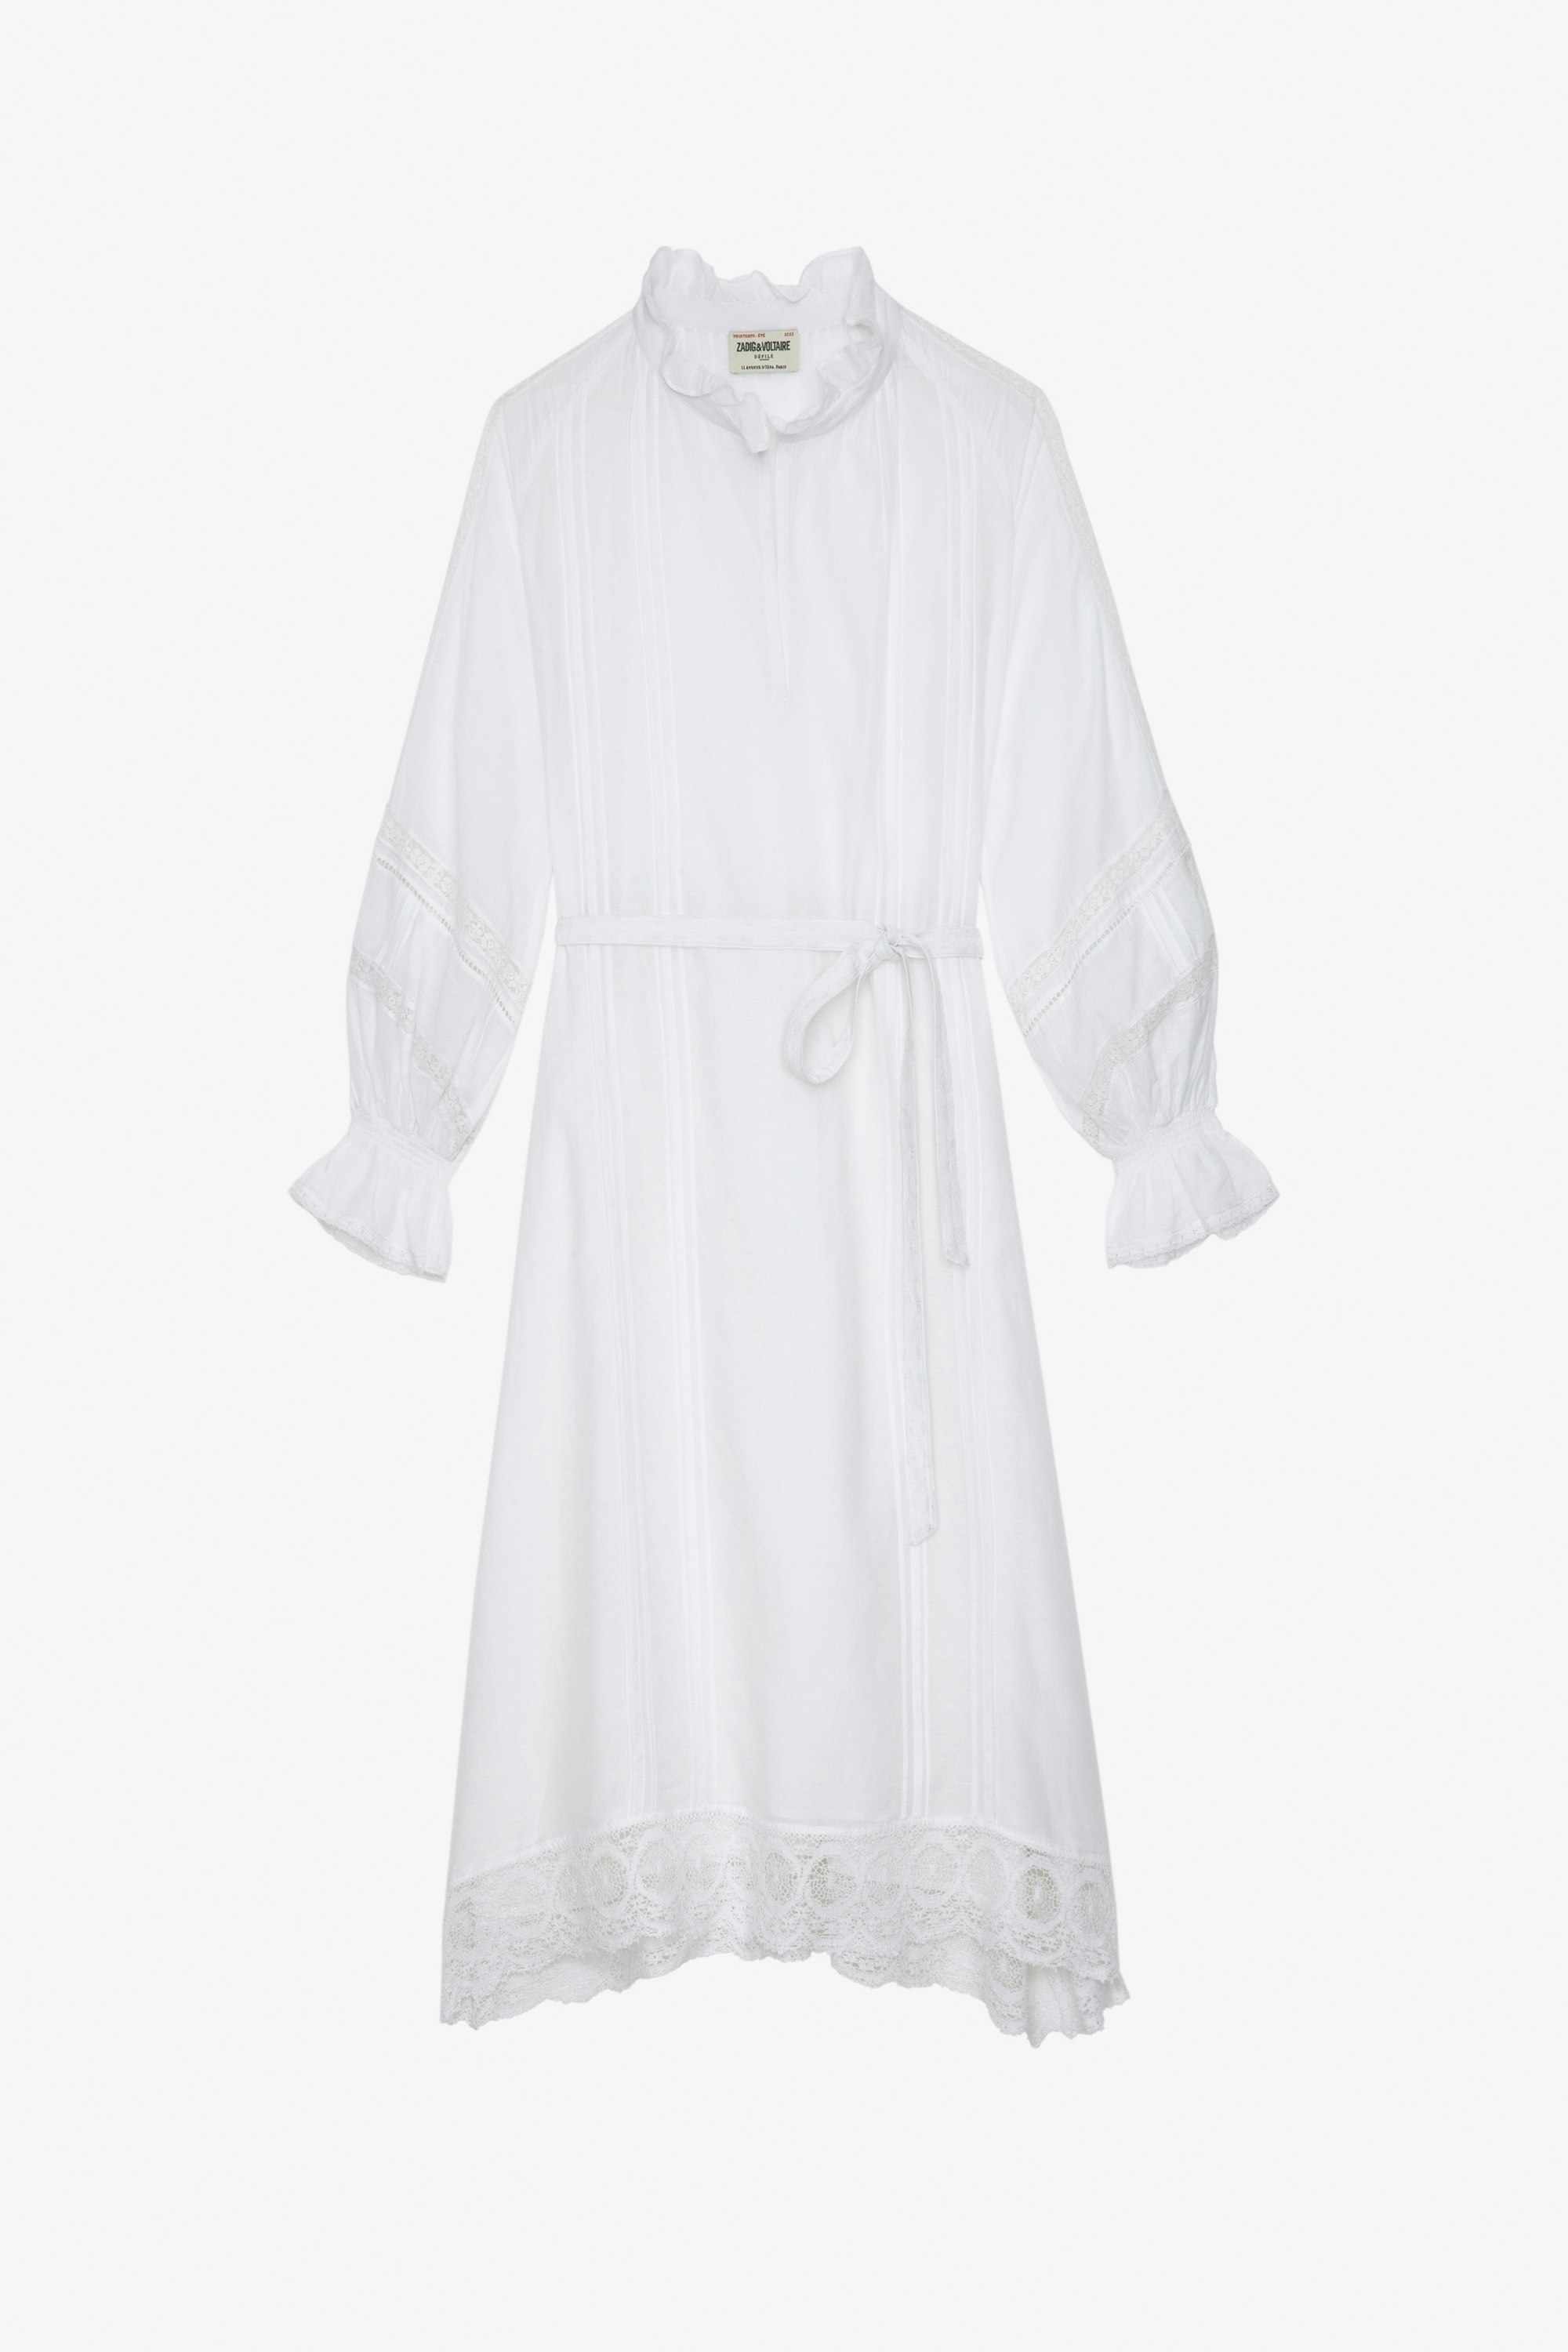 Rada Dress Women's asymmetrical white dress with lace strips and puffed sleeves